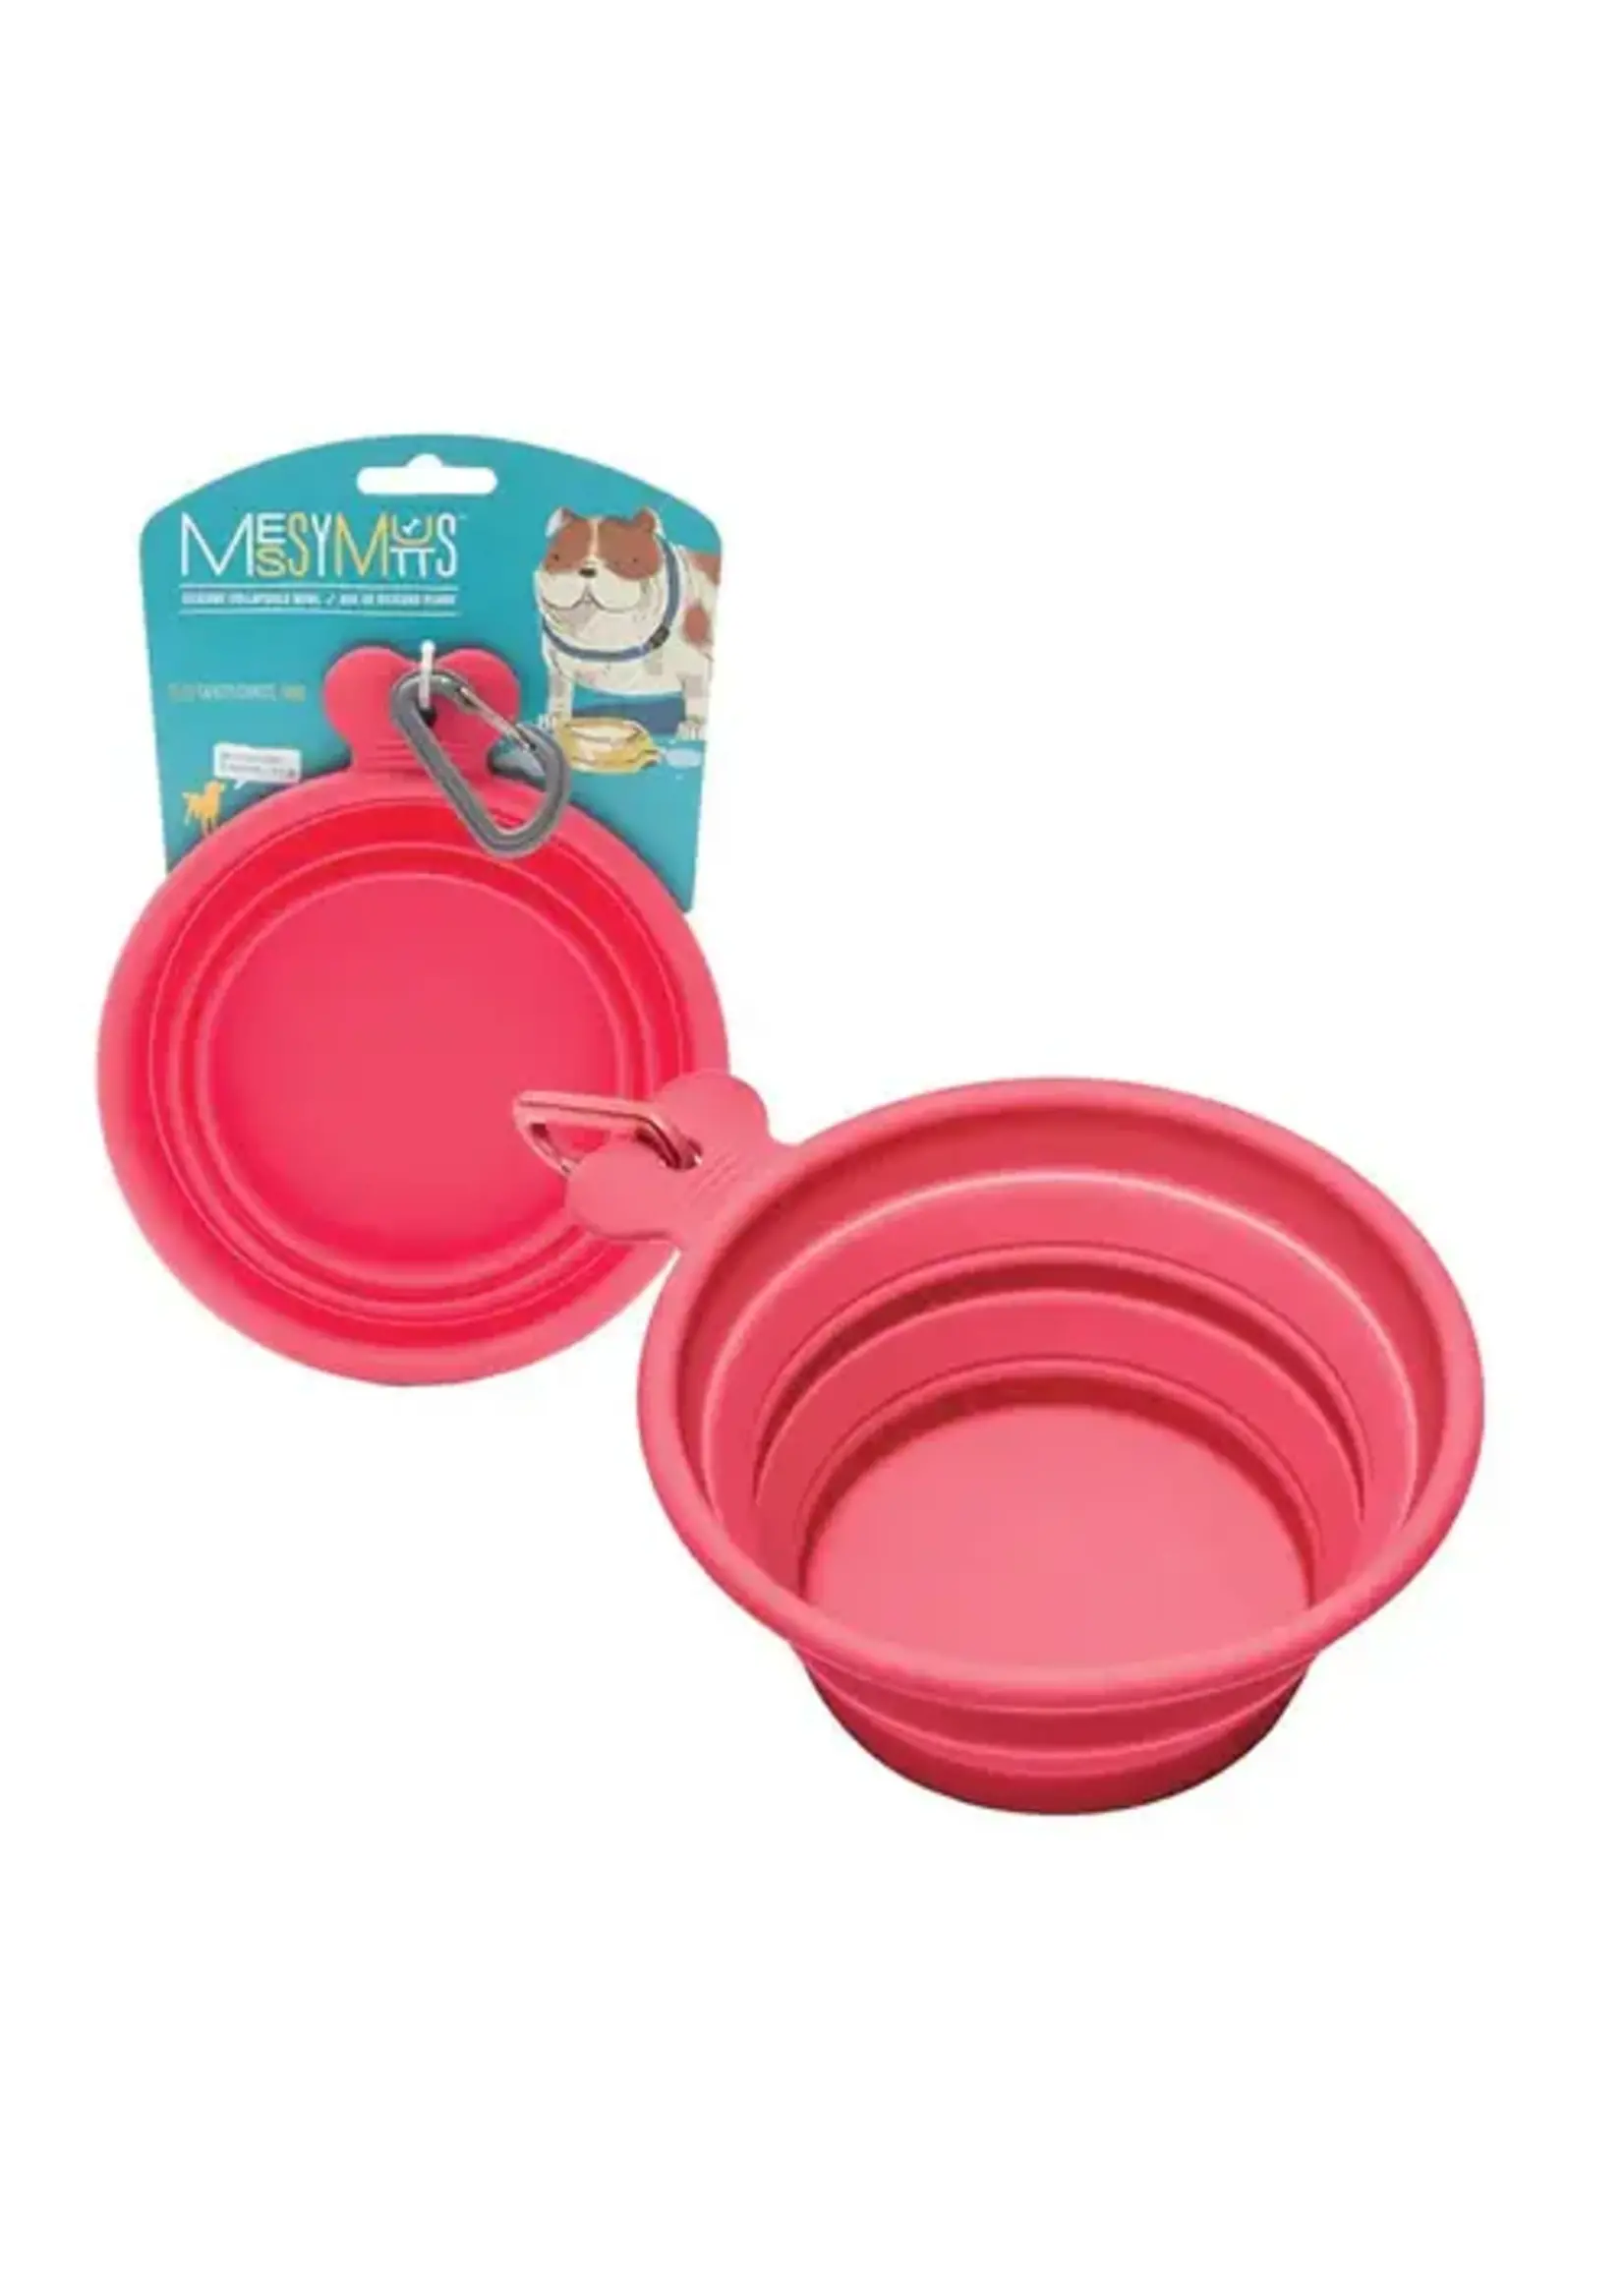 Messy Mutts Messy Mutts - Collapsible Bowl